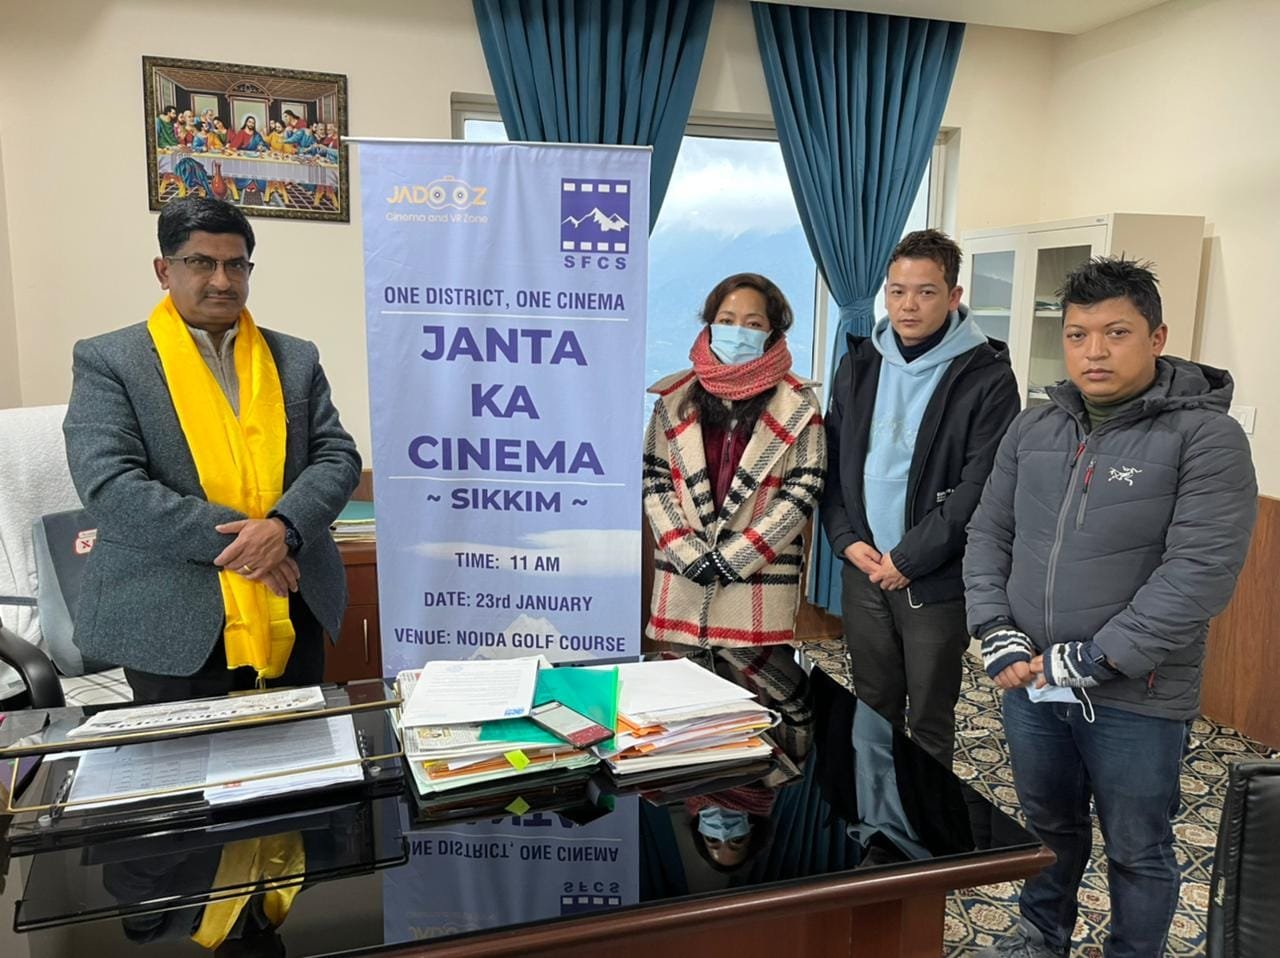 Sikkim and the National Film Industry — My SKM